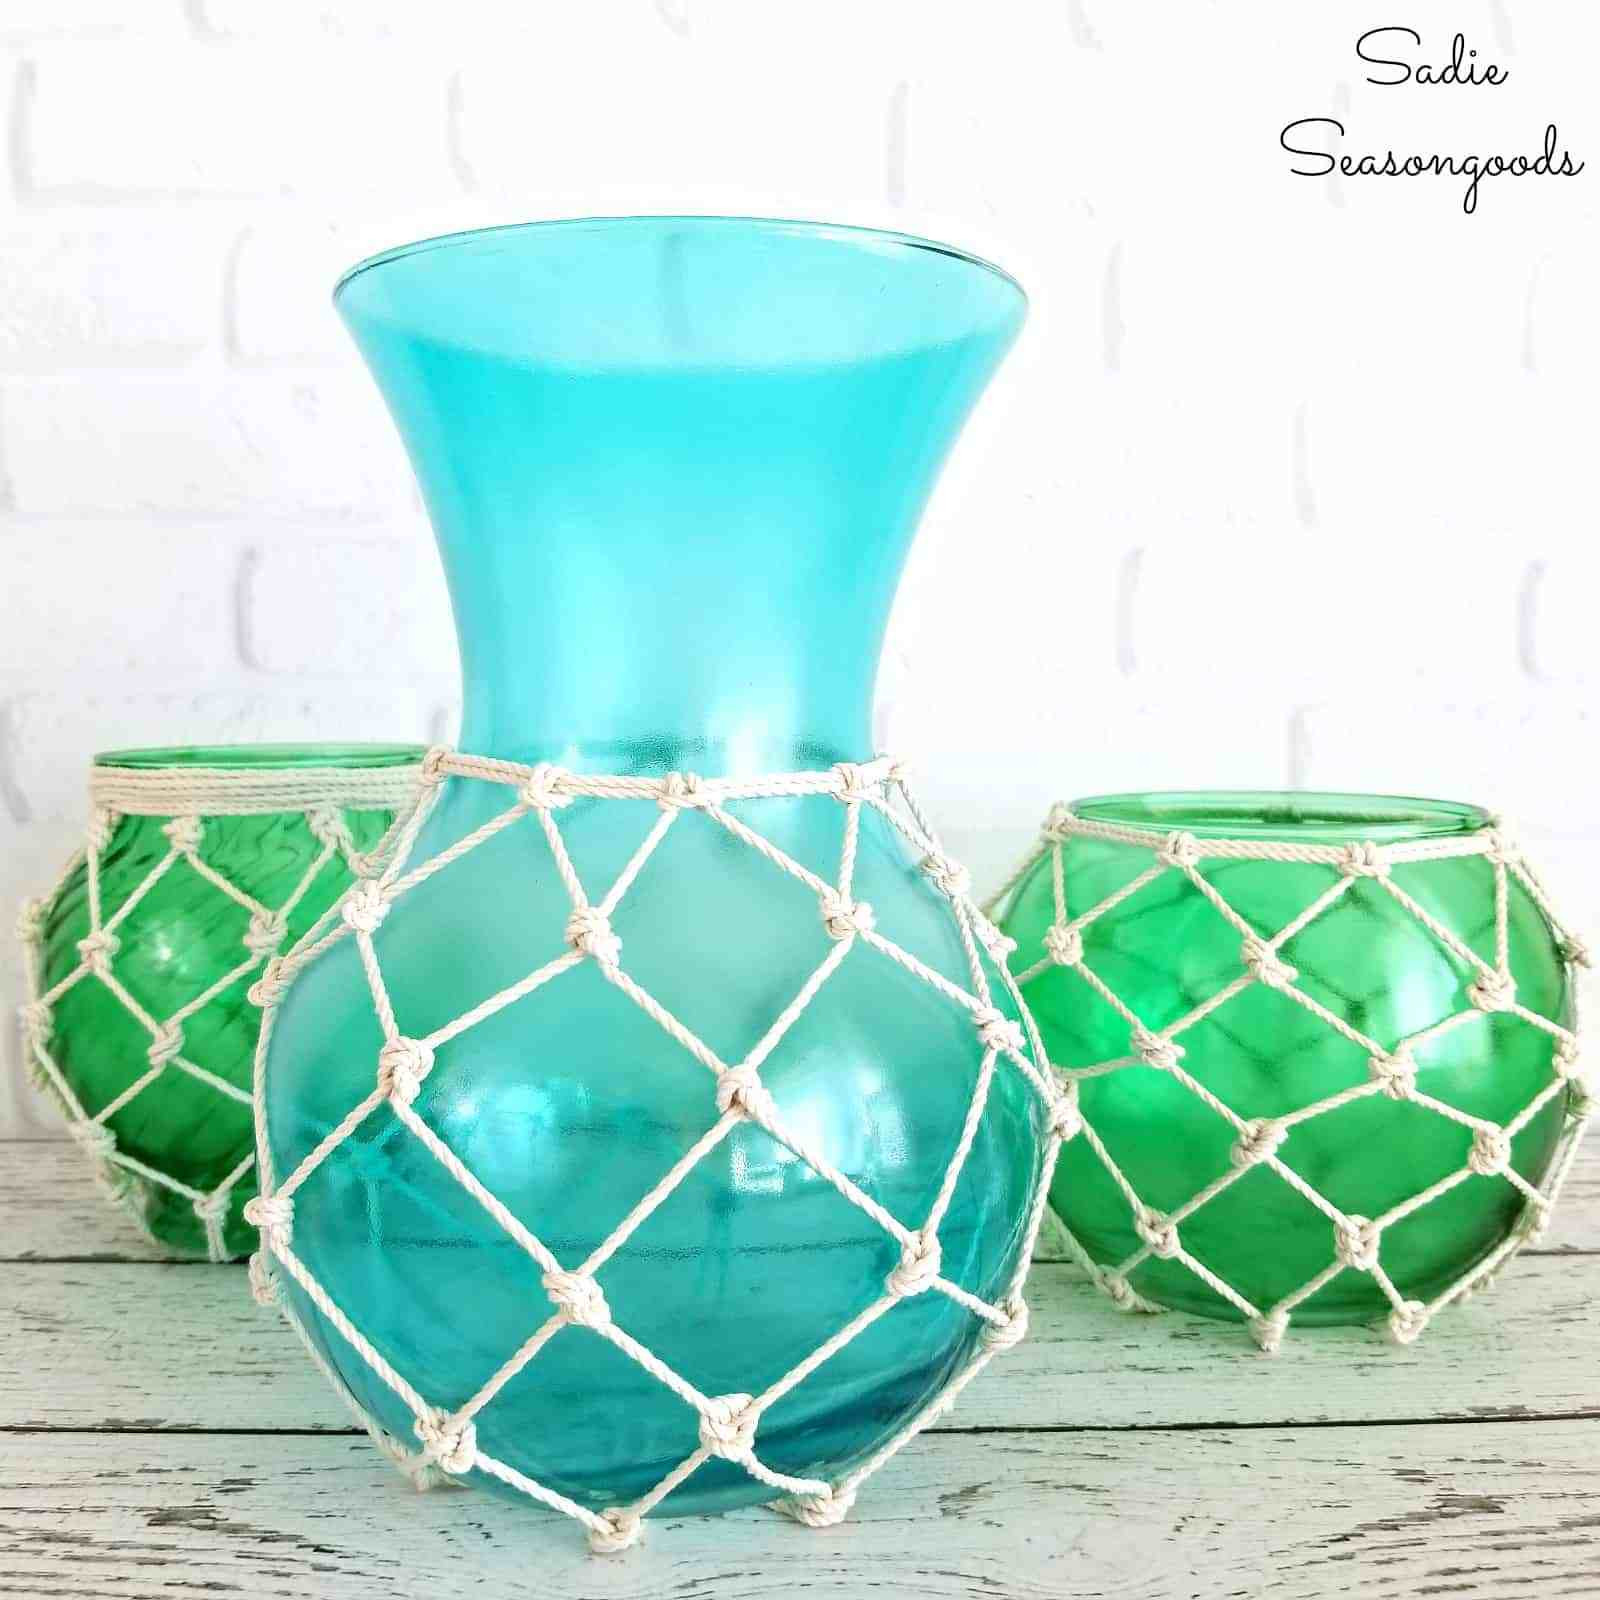 29 Lovable Teal Vases and Bowls 2024 free download teal vases and bowls of glass buoy candles www topsimages com intended for diy japanese fishing floats from upcycled thrift store glass bowls jpg 1600x1600 glass buoy candles